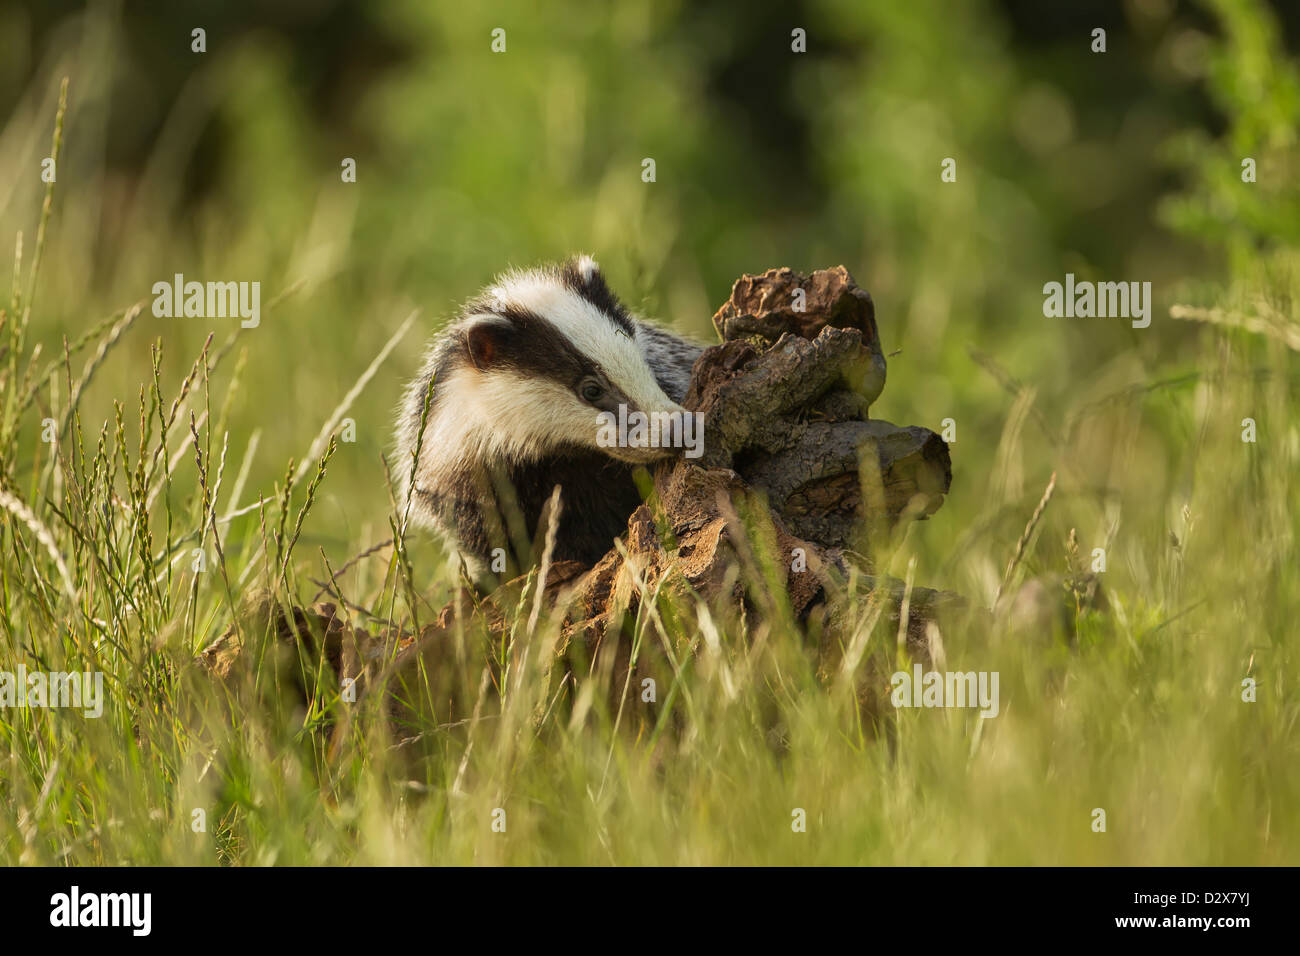 European Badger sniffing at a tree stump in the spring evening light Stock Photo